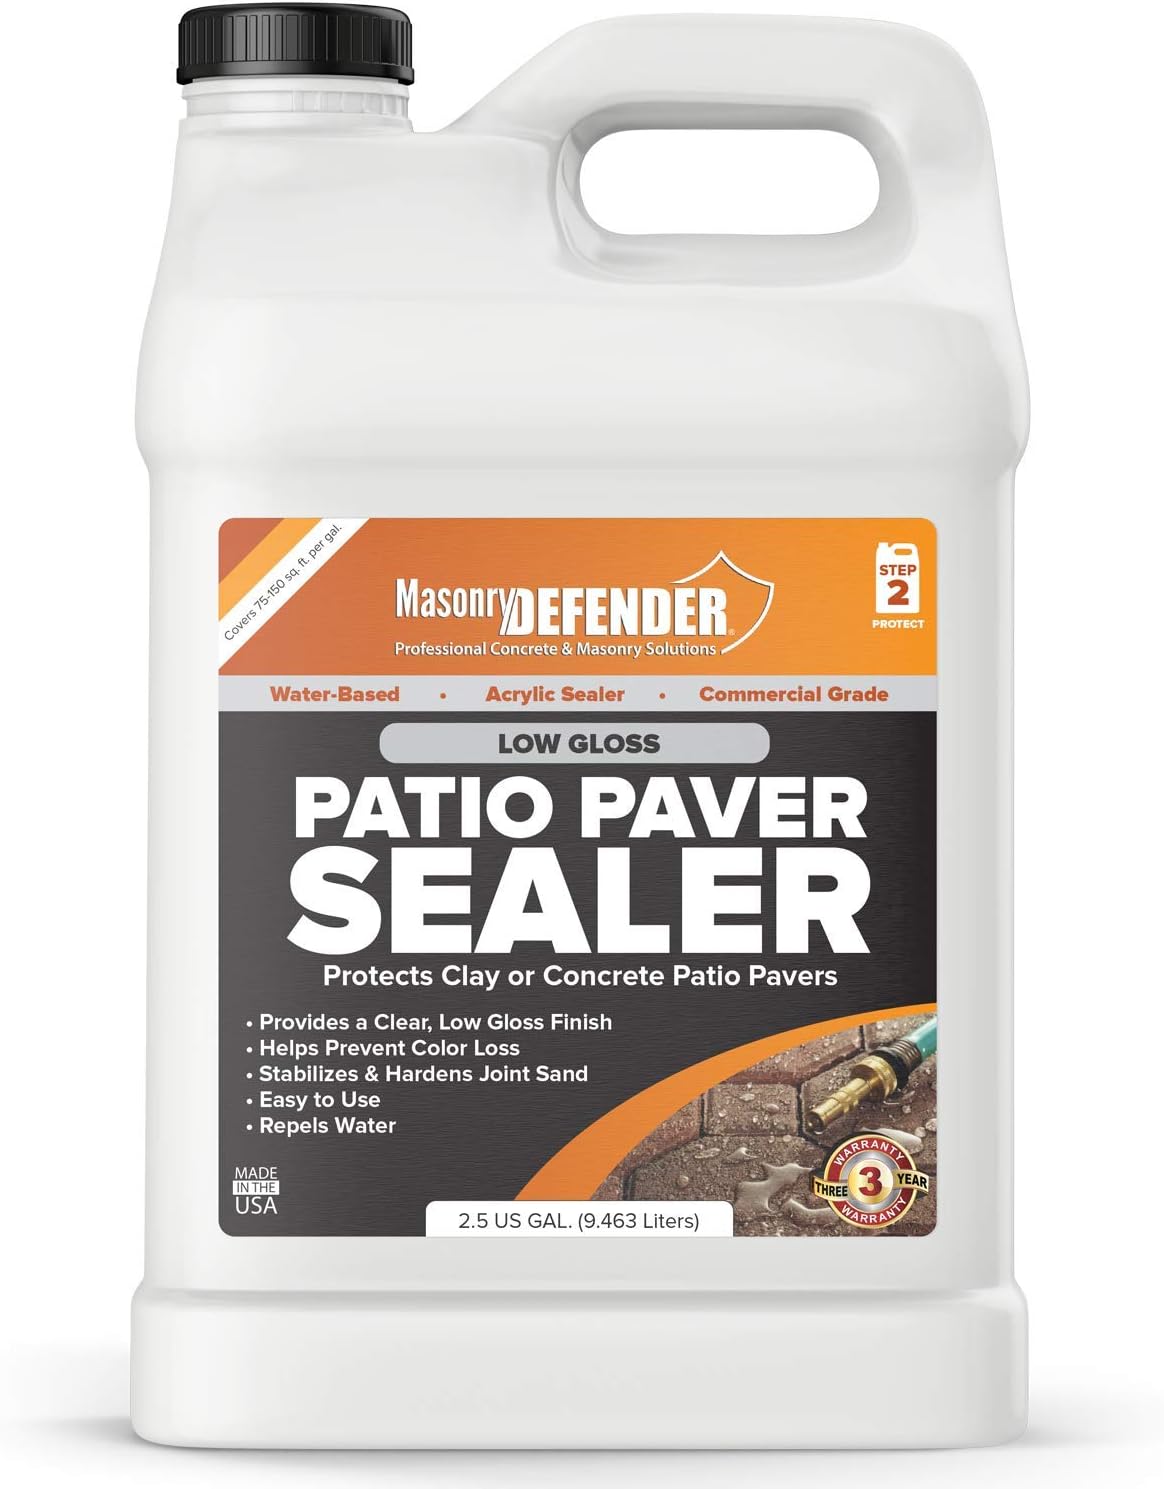 Low Gloss Patio Paver Sealer, 2.5 gal - Clear Water- [...]